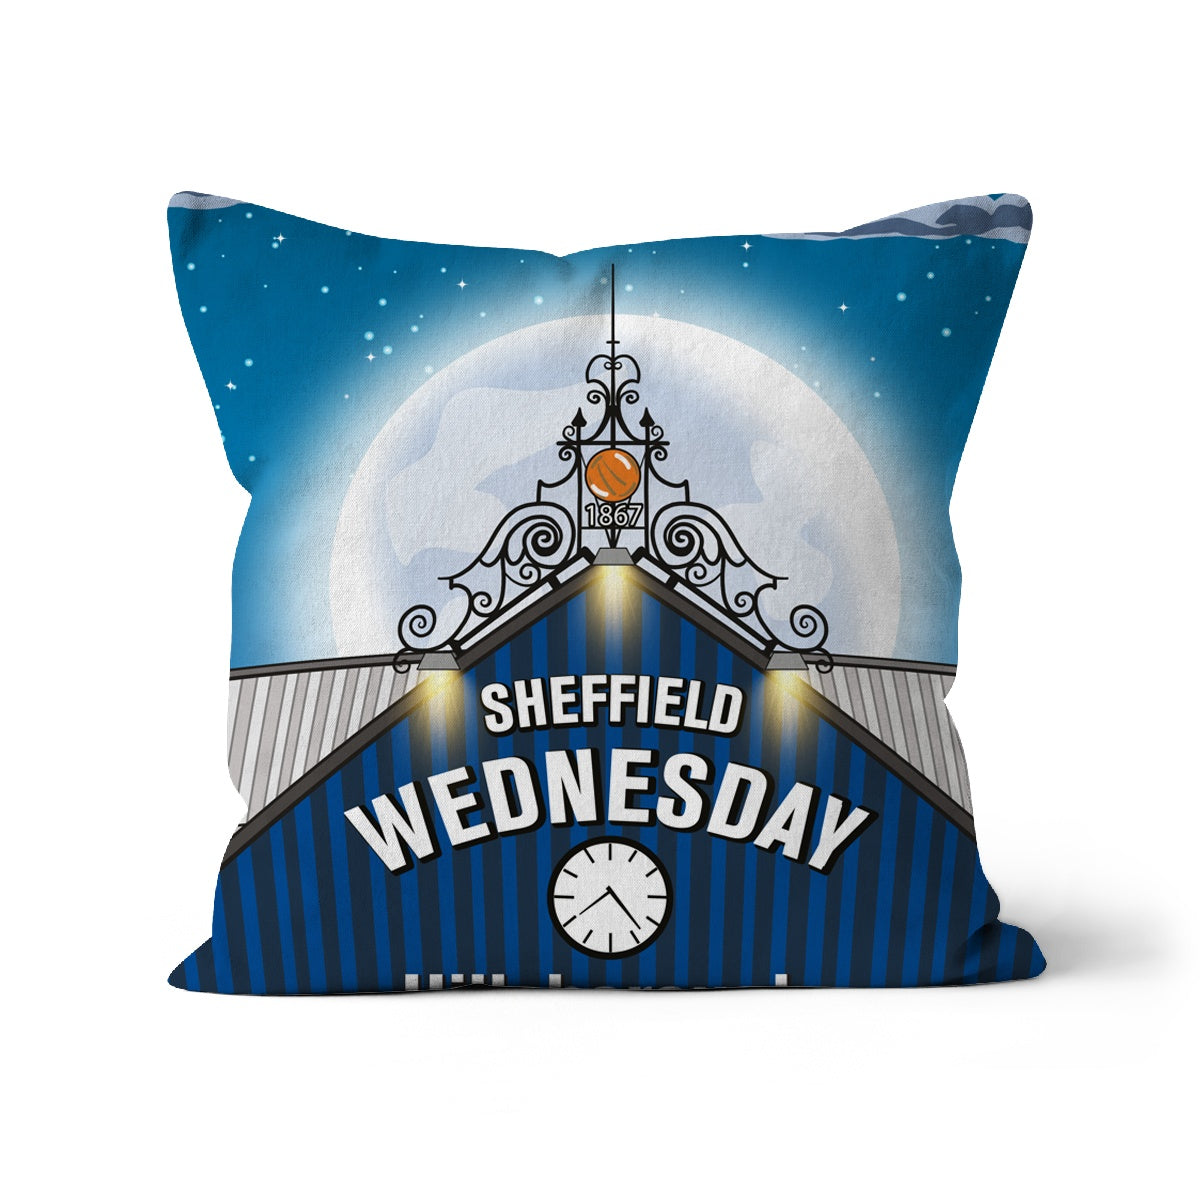 SWFC South Stand Cushion